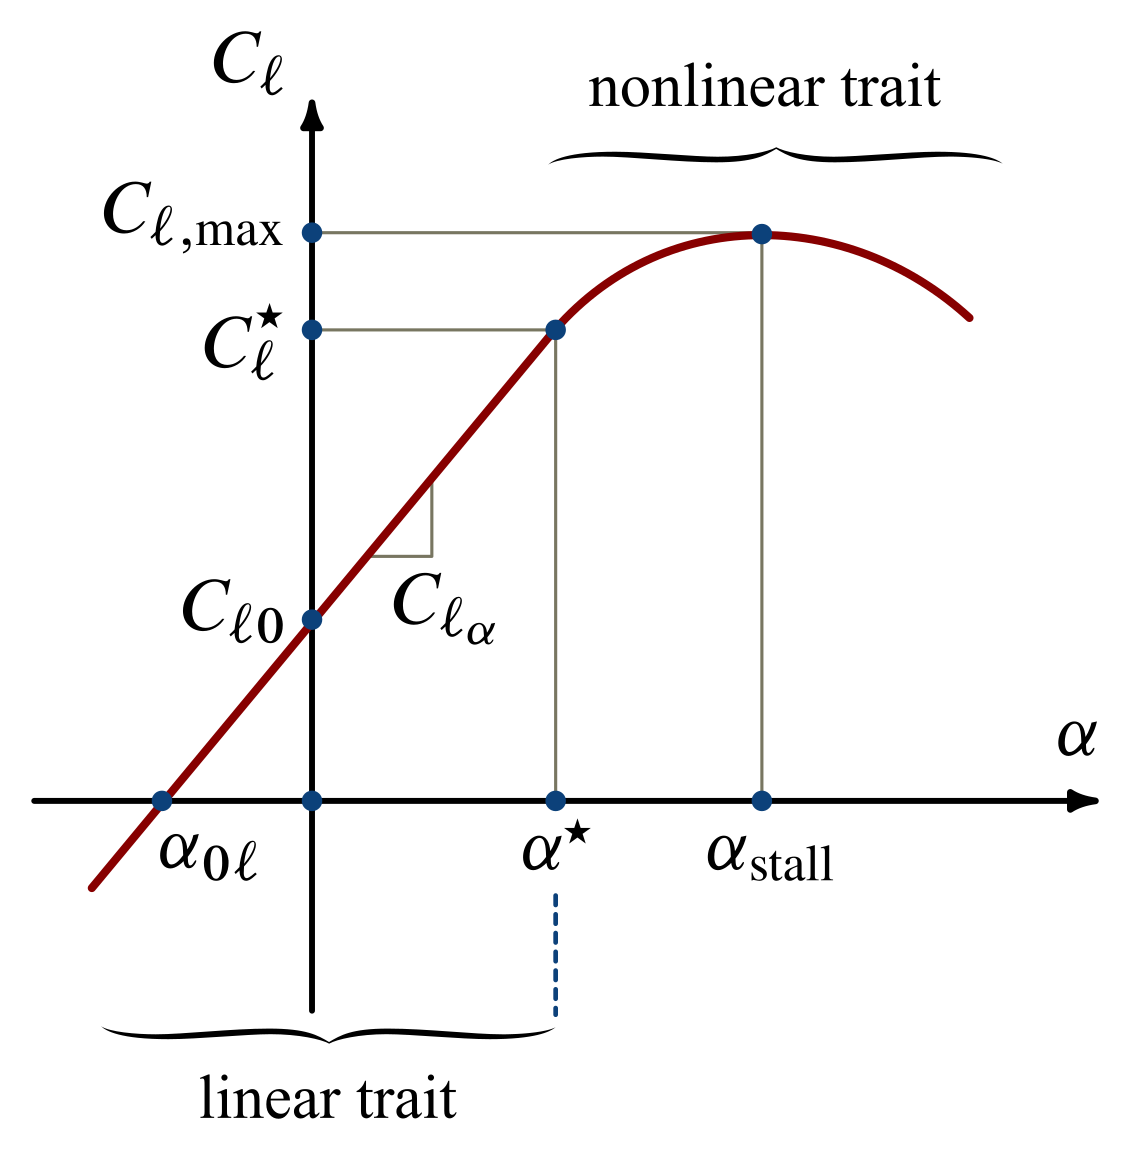 A typical curve of airfoil lift coefficient $C_\ell$ versus angle of attack $\alpha$.